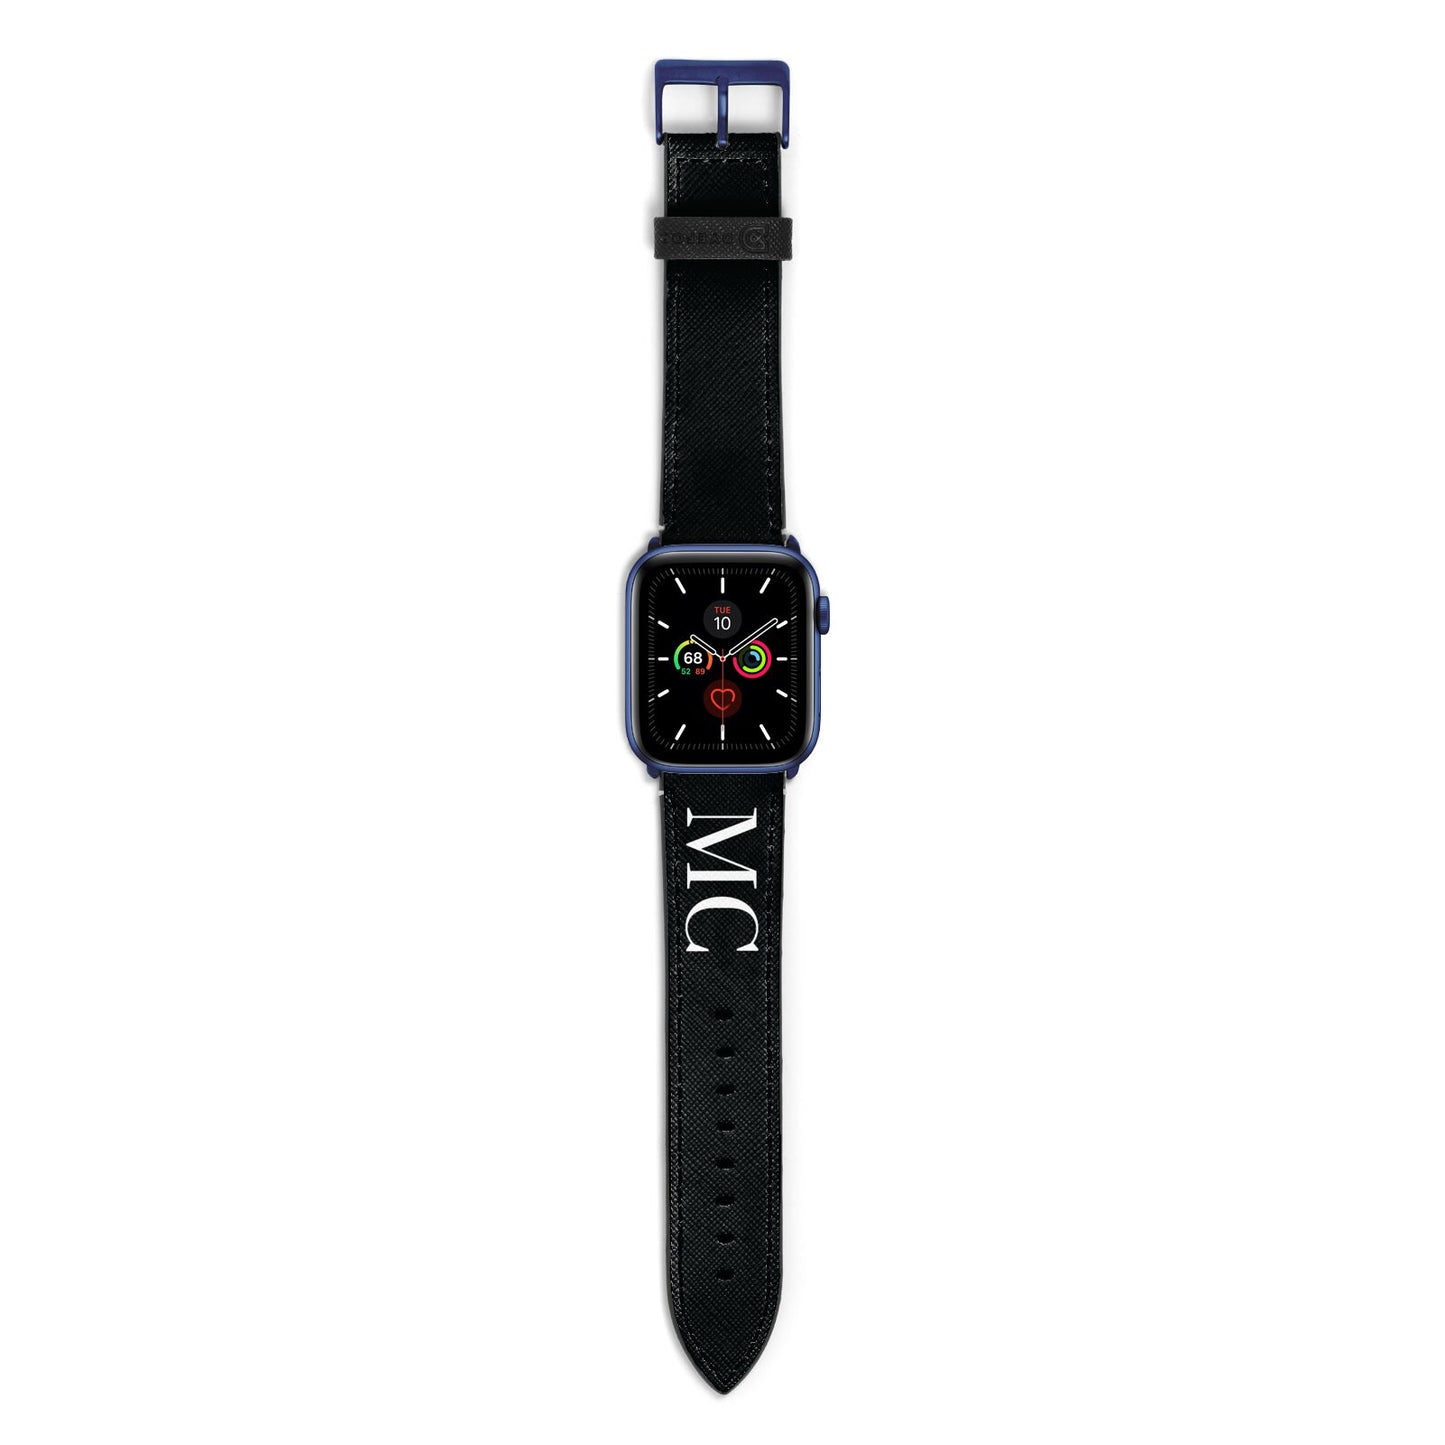 Initials Personalised 1 Apple Watch Strap with Blue Hardware